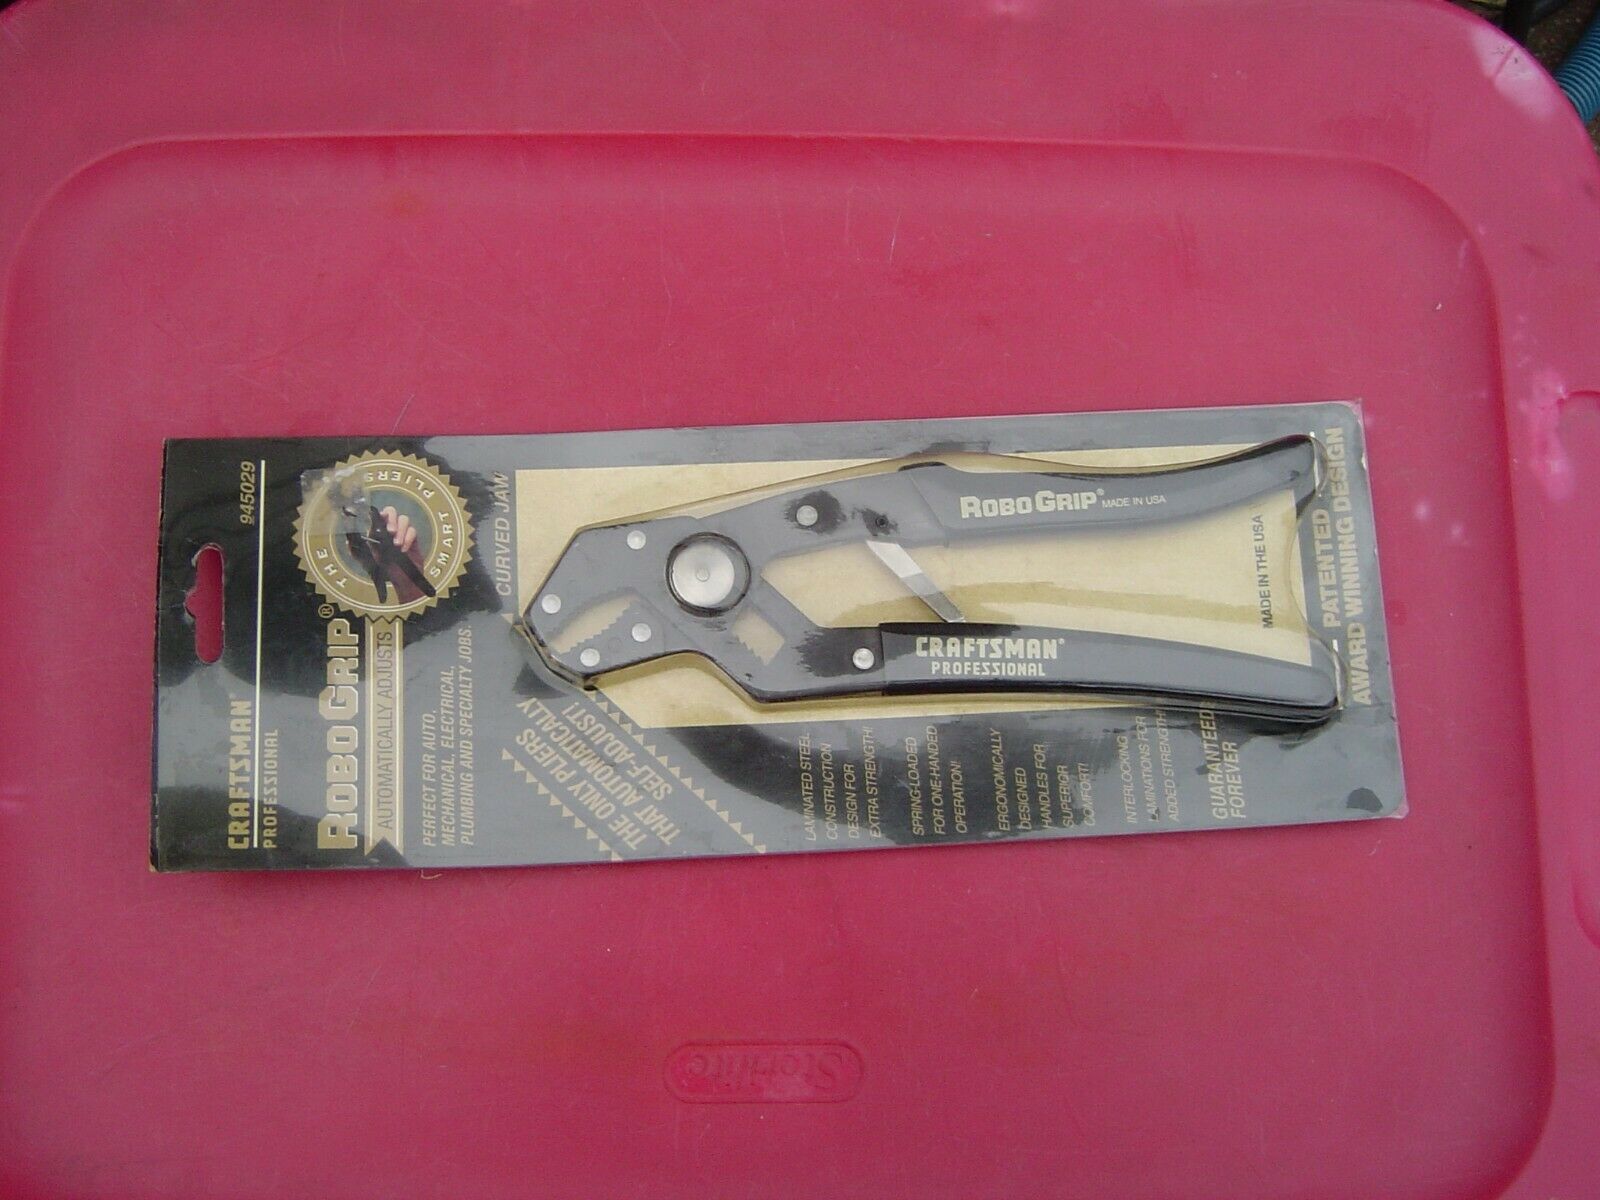 Craftsman Robo Grip Pliers Plumbers Tool New Old Stock Made In Usa